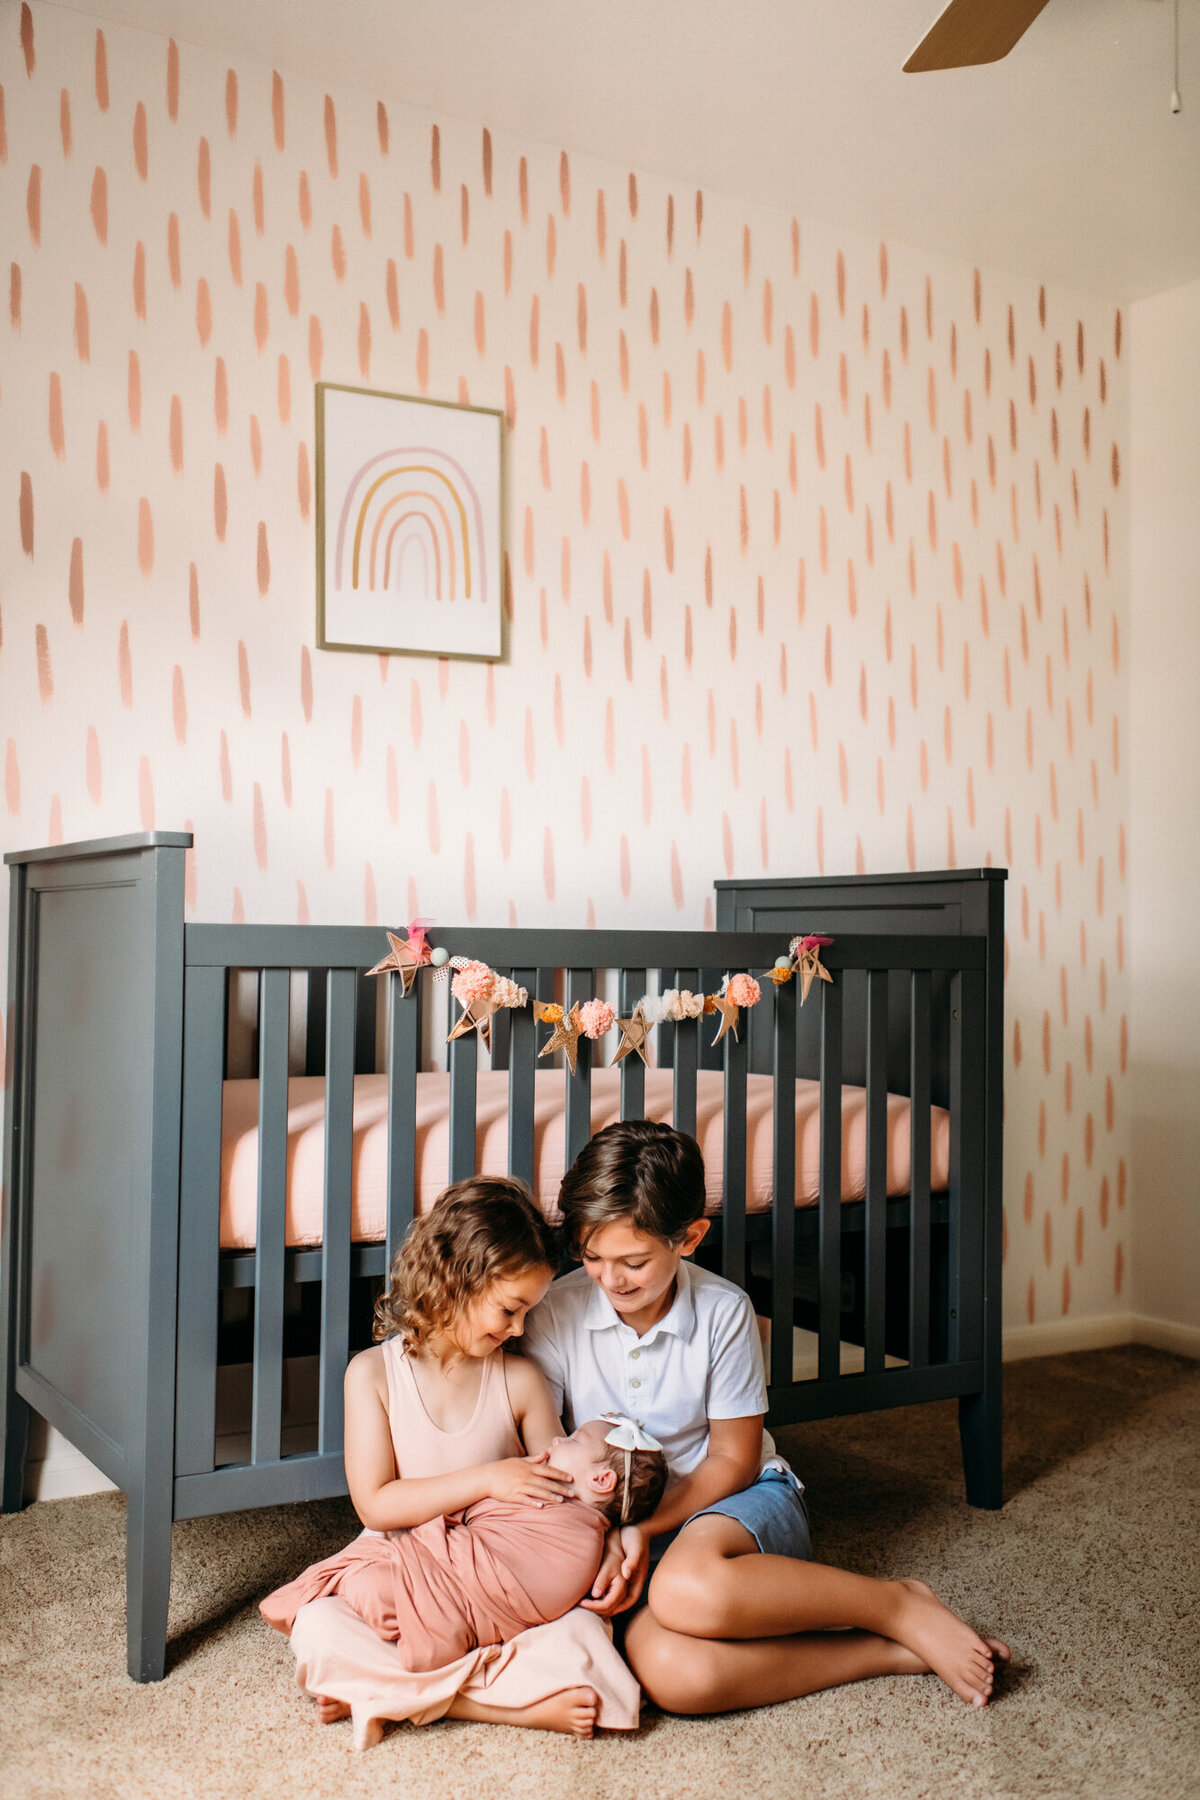 Newborn Photographer, Little boy and girl sitting in front of a crib on the floor while holding their baby sister.